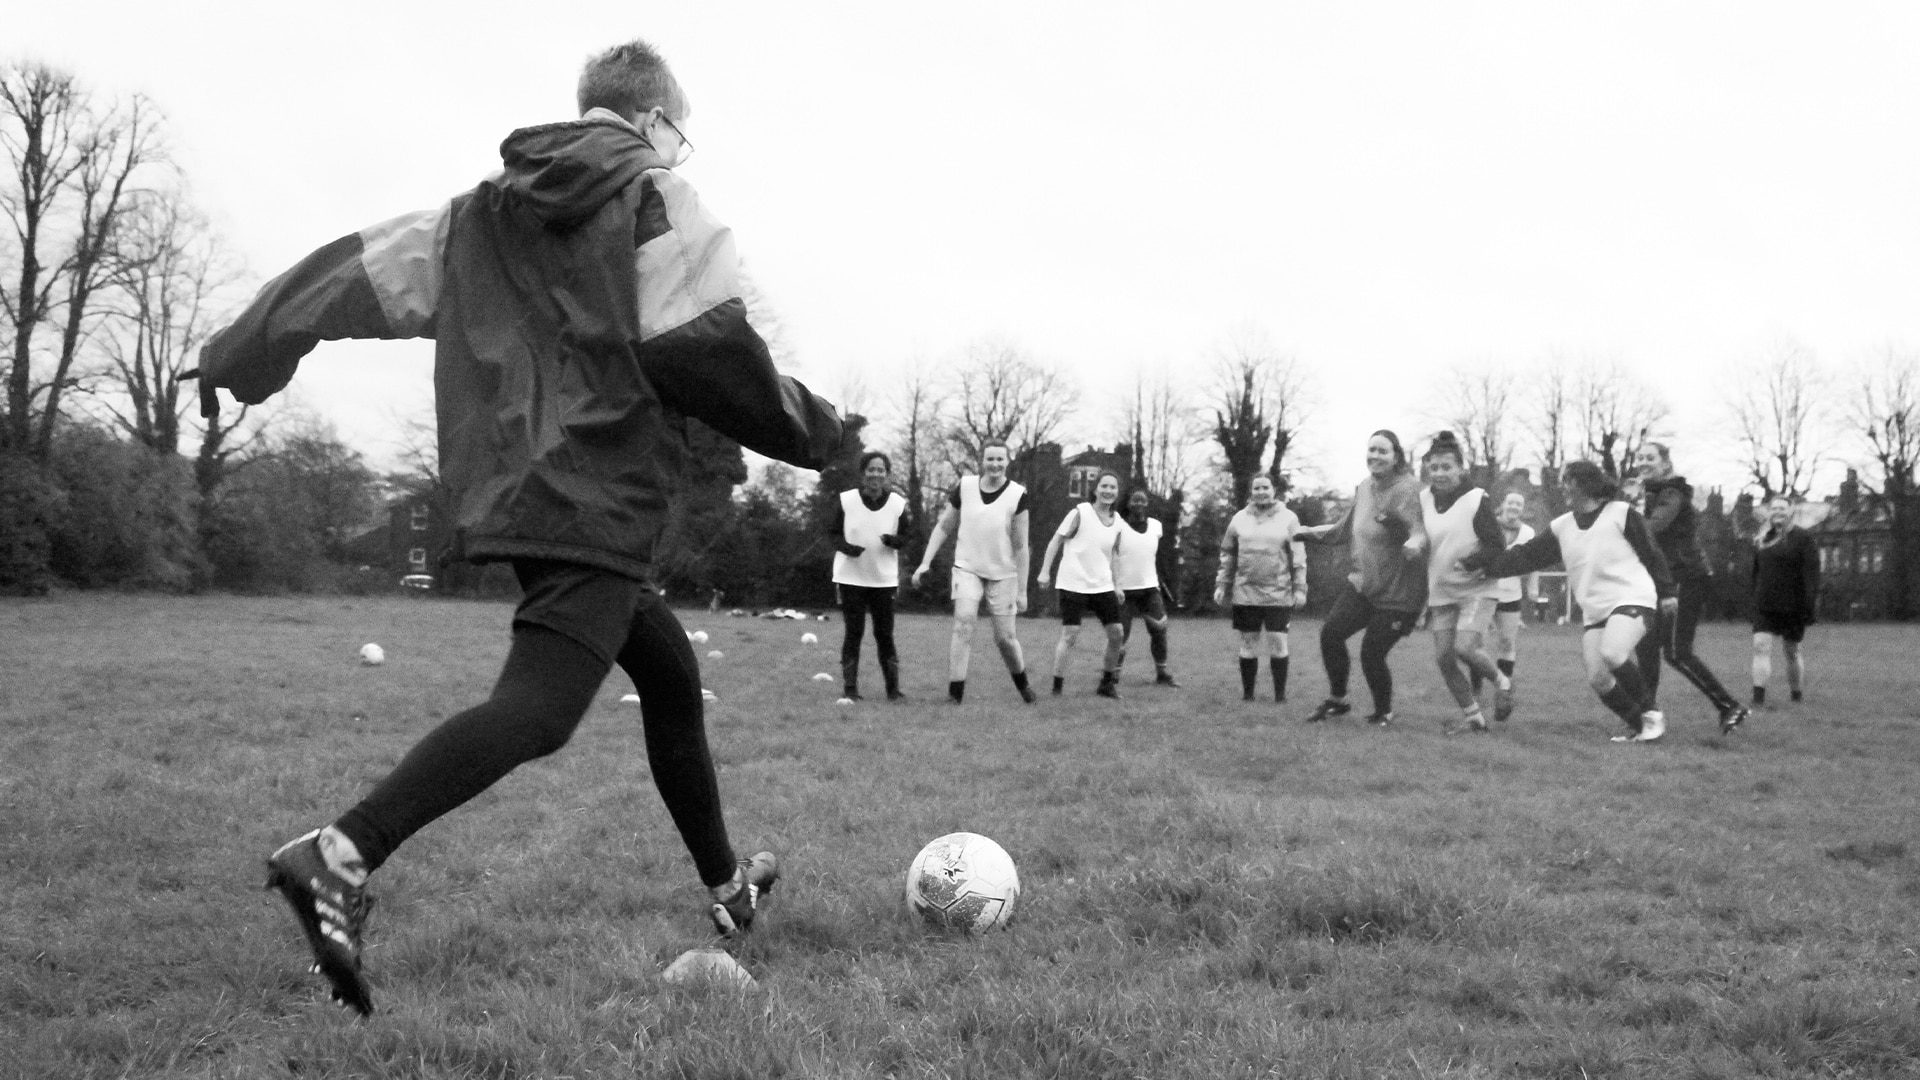 A photograph from Saf Jarvis' Man's Game of a training session between a women's football team on a recreation ground by Burley Park allotments